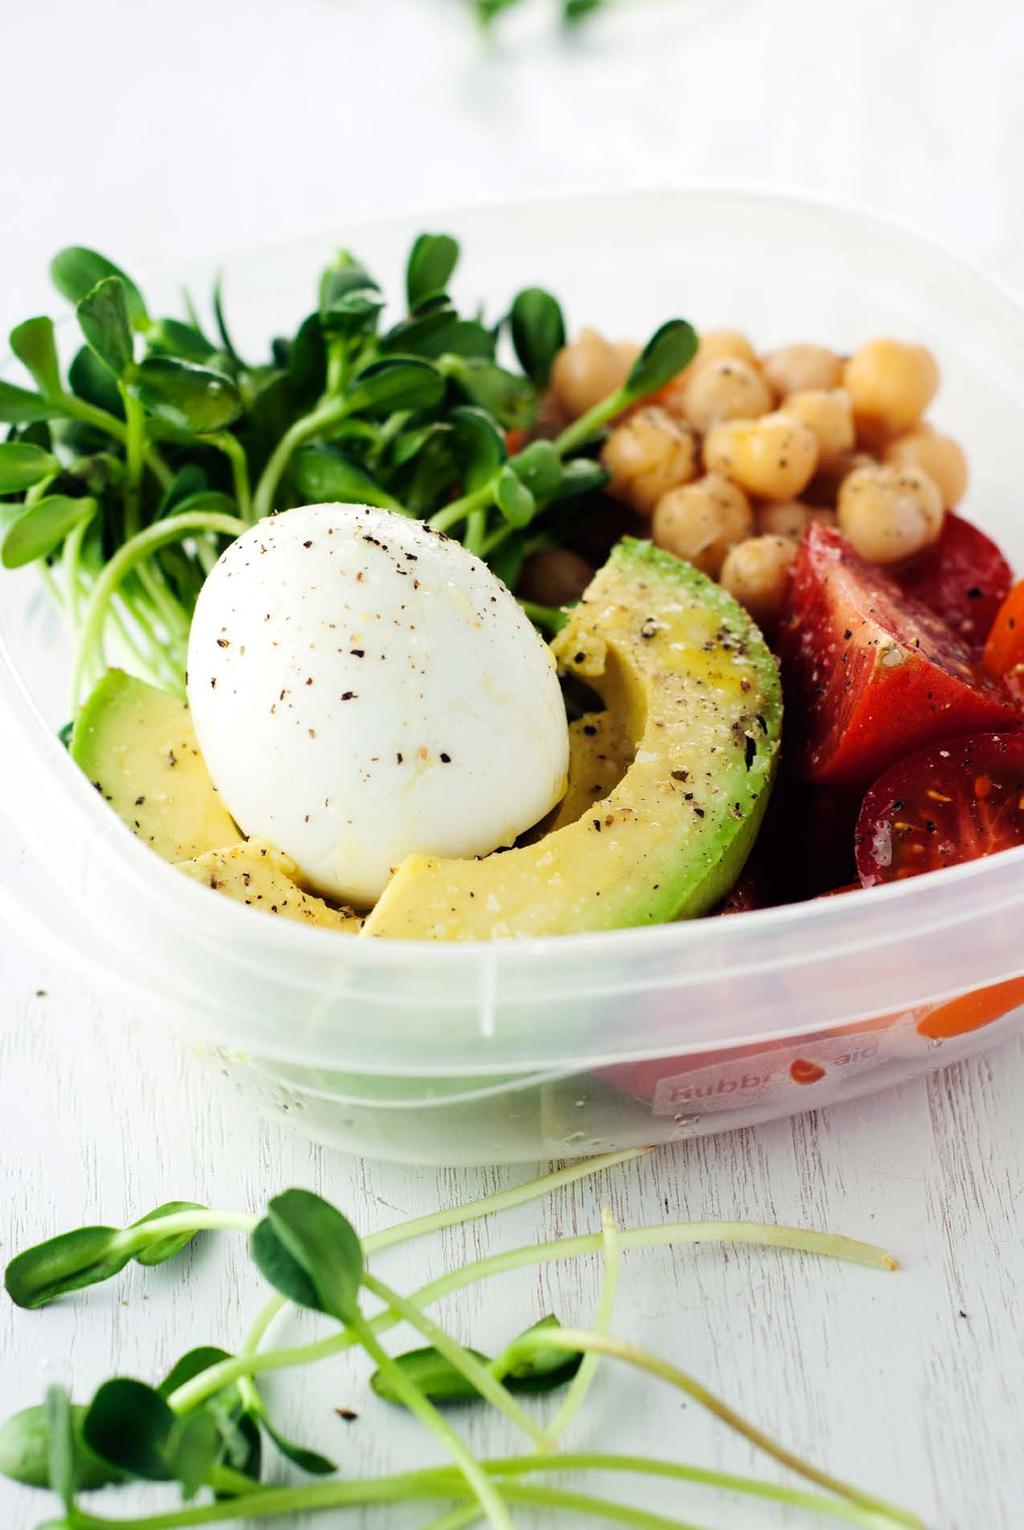 16. High Protein Lunchbox Keep your energy high for the rest of the day with this protein-packed lunchbox filled with deliciously simple eats that is ready to go in just five minutes!